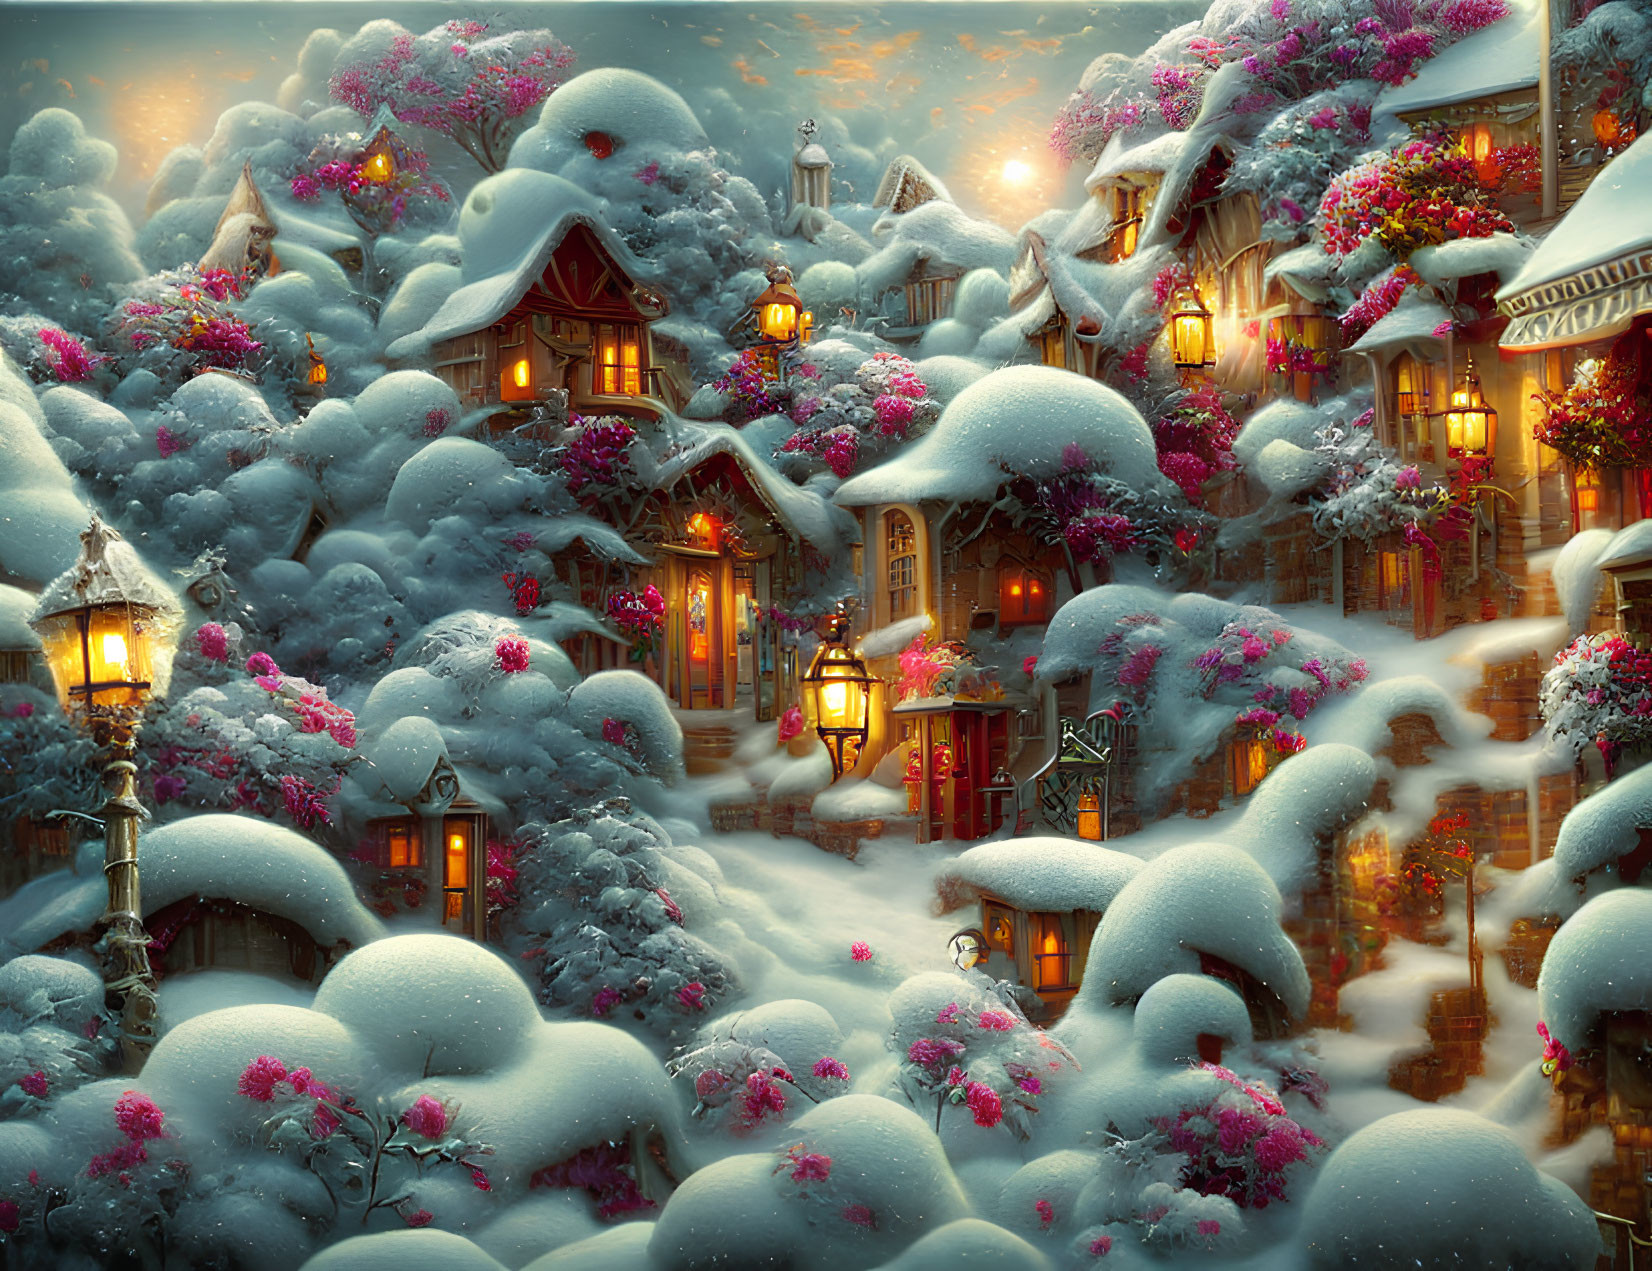 Snow-covered cottages in a glowing winter village scene